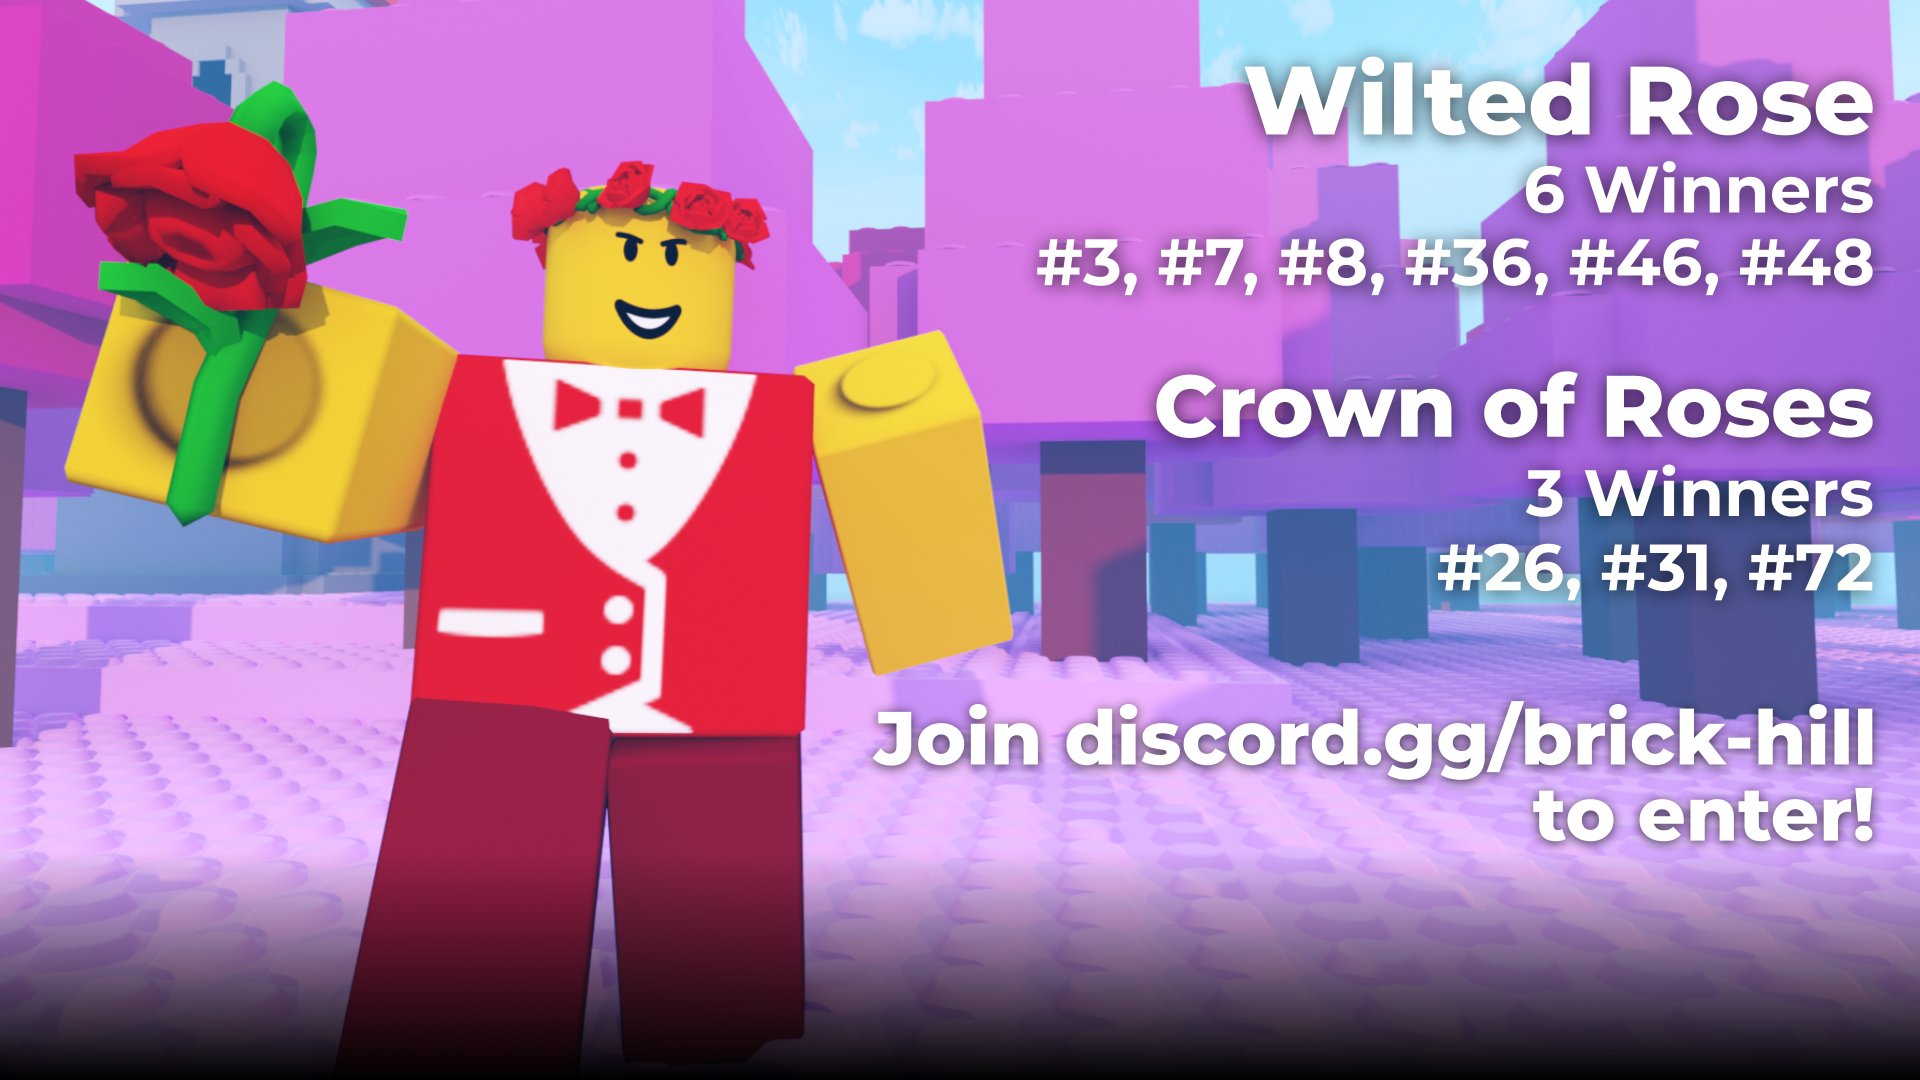 Brick Hill on X: We're also giving away 6 copies of the Wilted Rose item  and 3 copies of the Crown of Roses item! Make sure to join our discord at